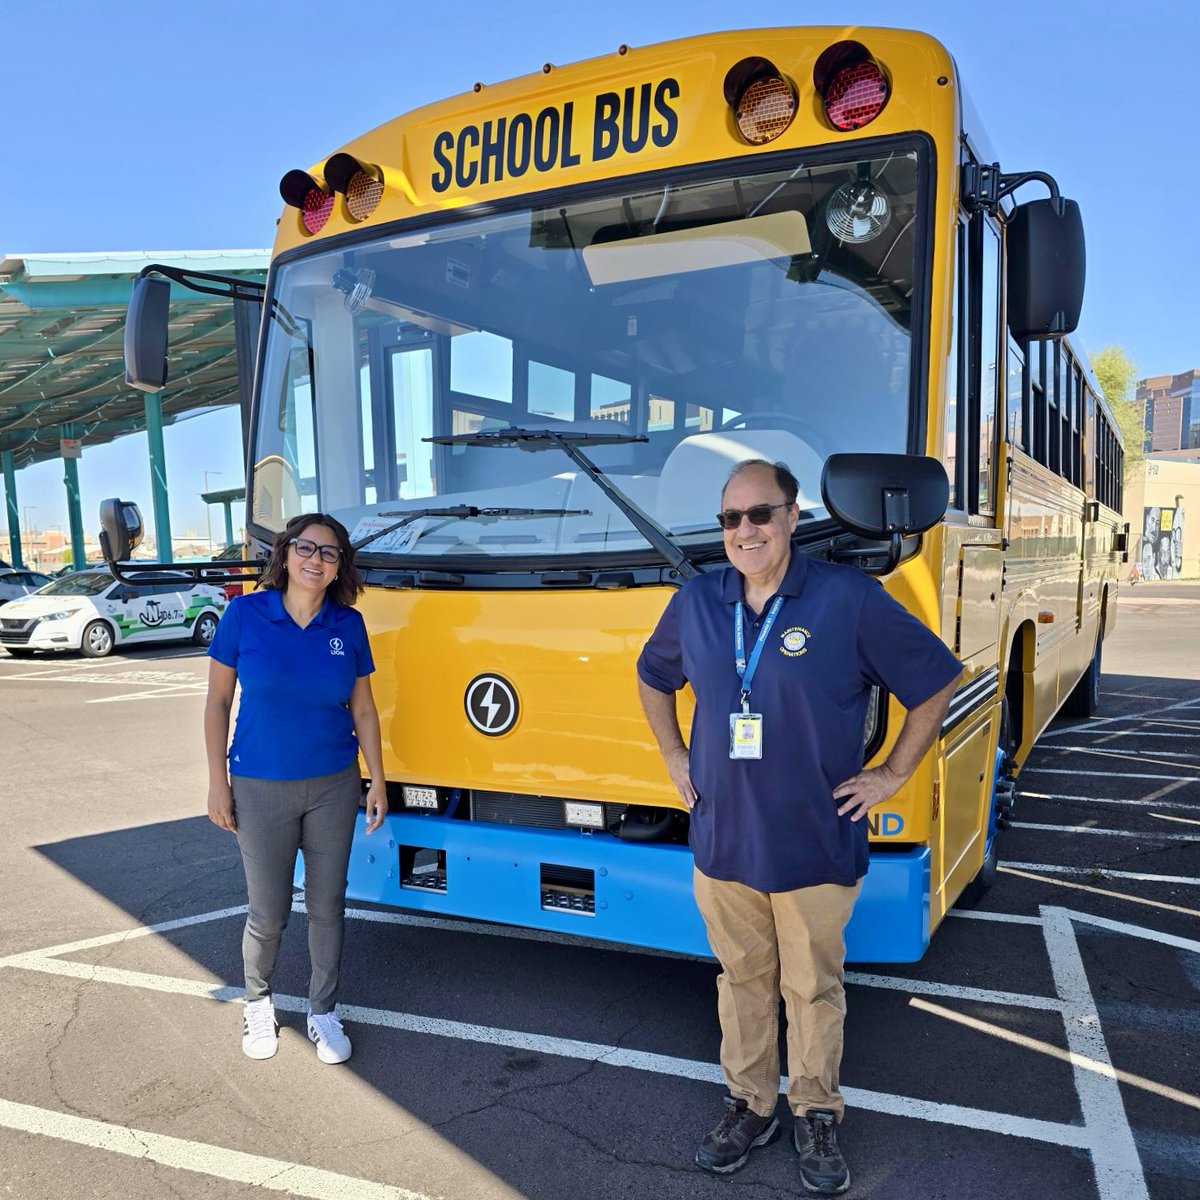 It was a busy April for Lion’s @Malinda_Sandhu showcasing the LionD in WA and AZ. The events are just in time for the @EPA’s clean and HD #EV funding to replace diesel buses. Contact us to learn more about how to apply for this program. @CleanAirMoms_AZ @ChispaAZ @phxschools